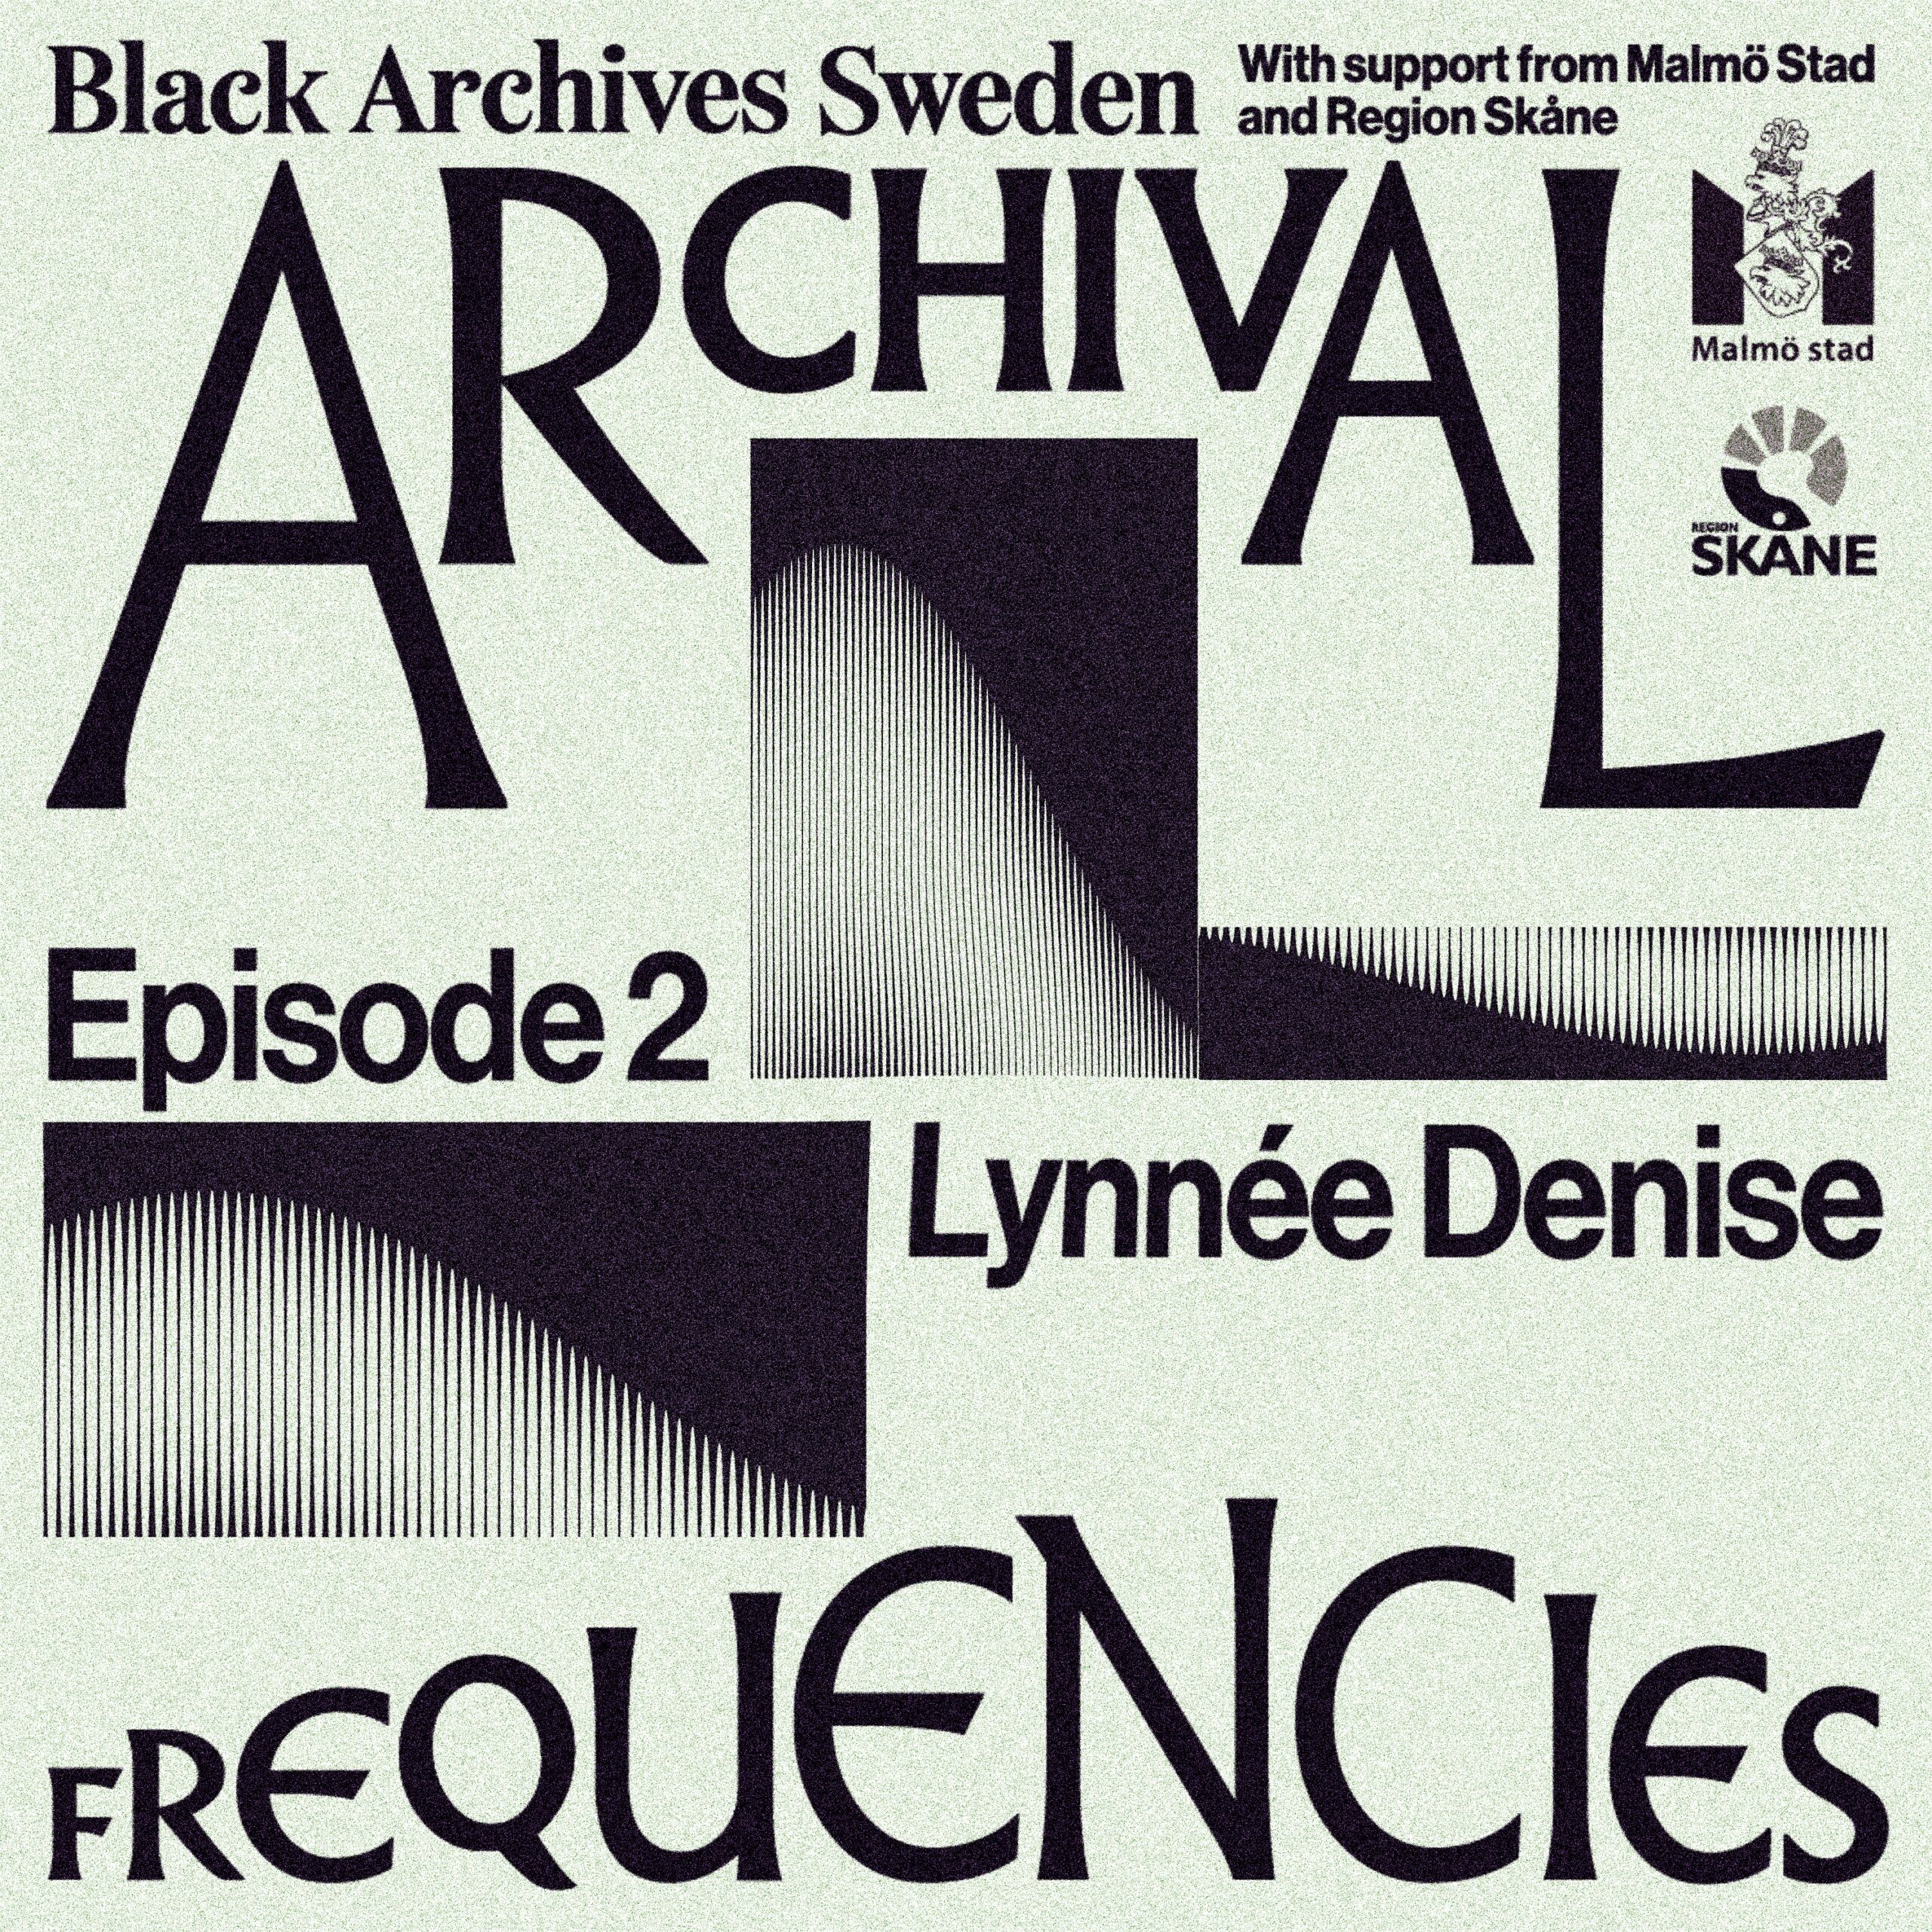 A grey poster with the text Archival Frequency Episode 2 Lynnée Denise on. There is also the logos of the funders of the episode and Black Archives Sweden.